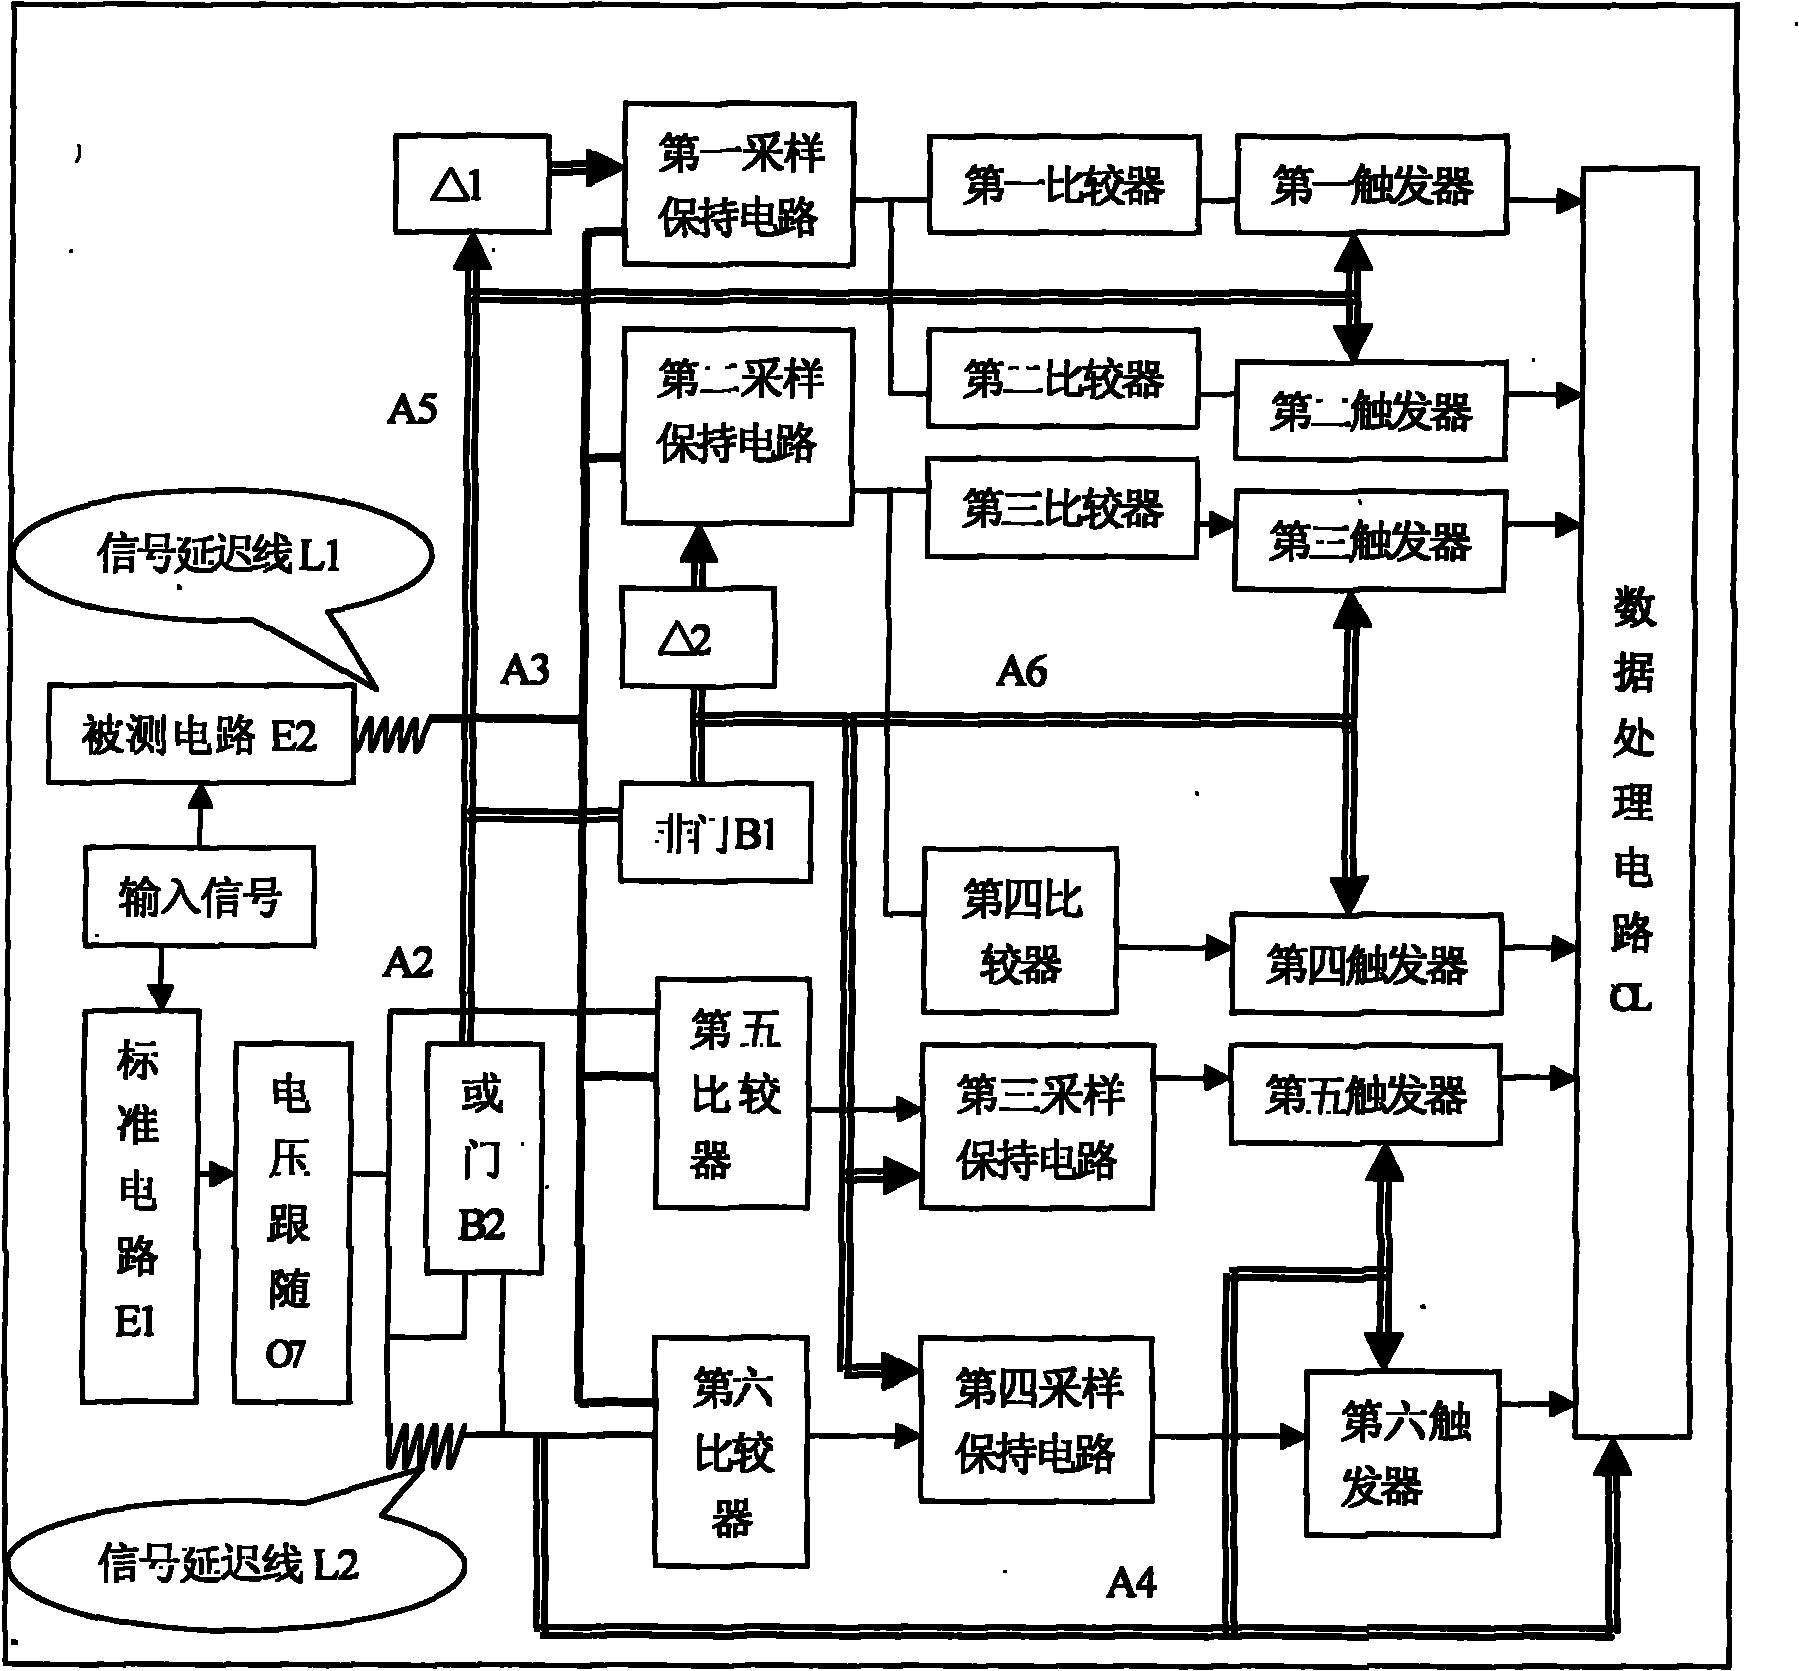 Circuit signal detection device